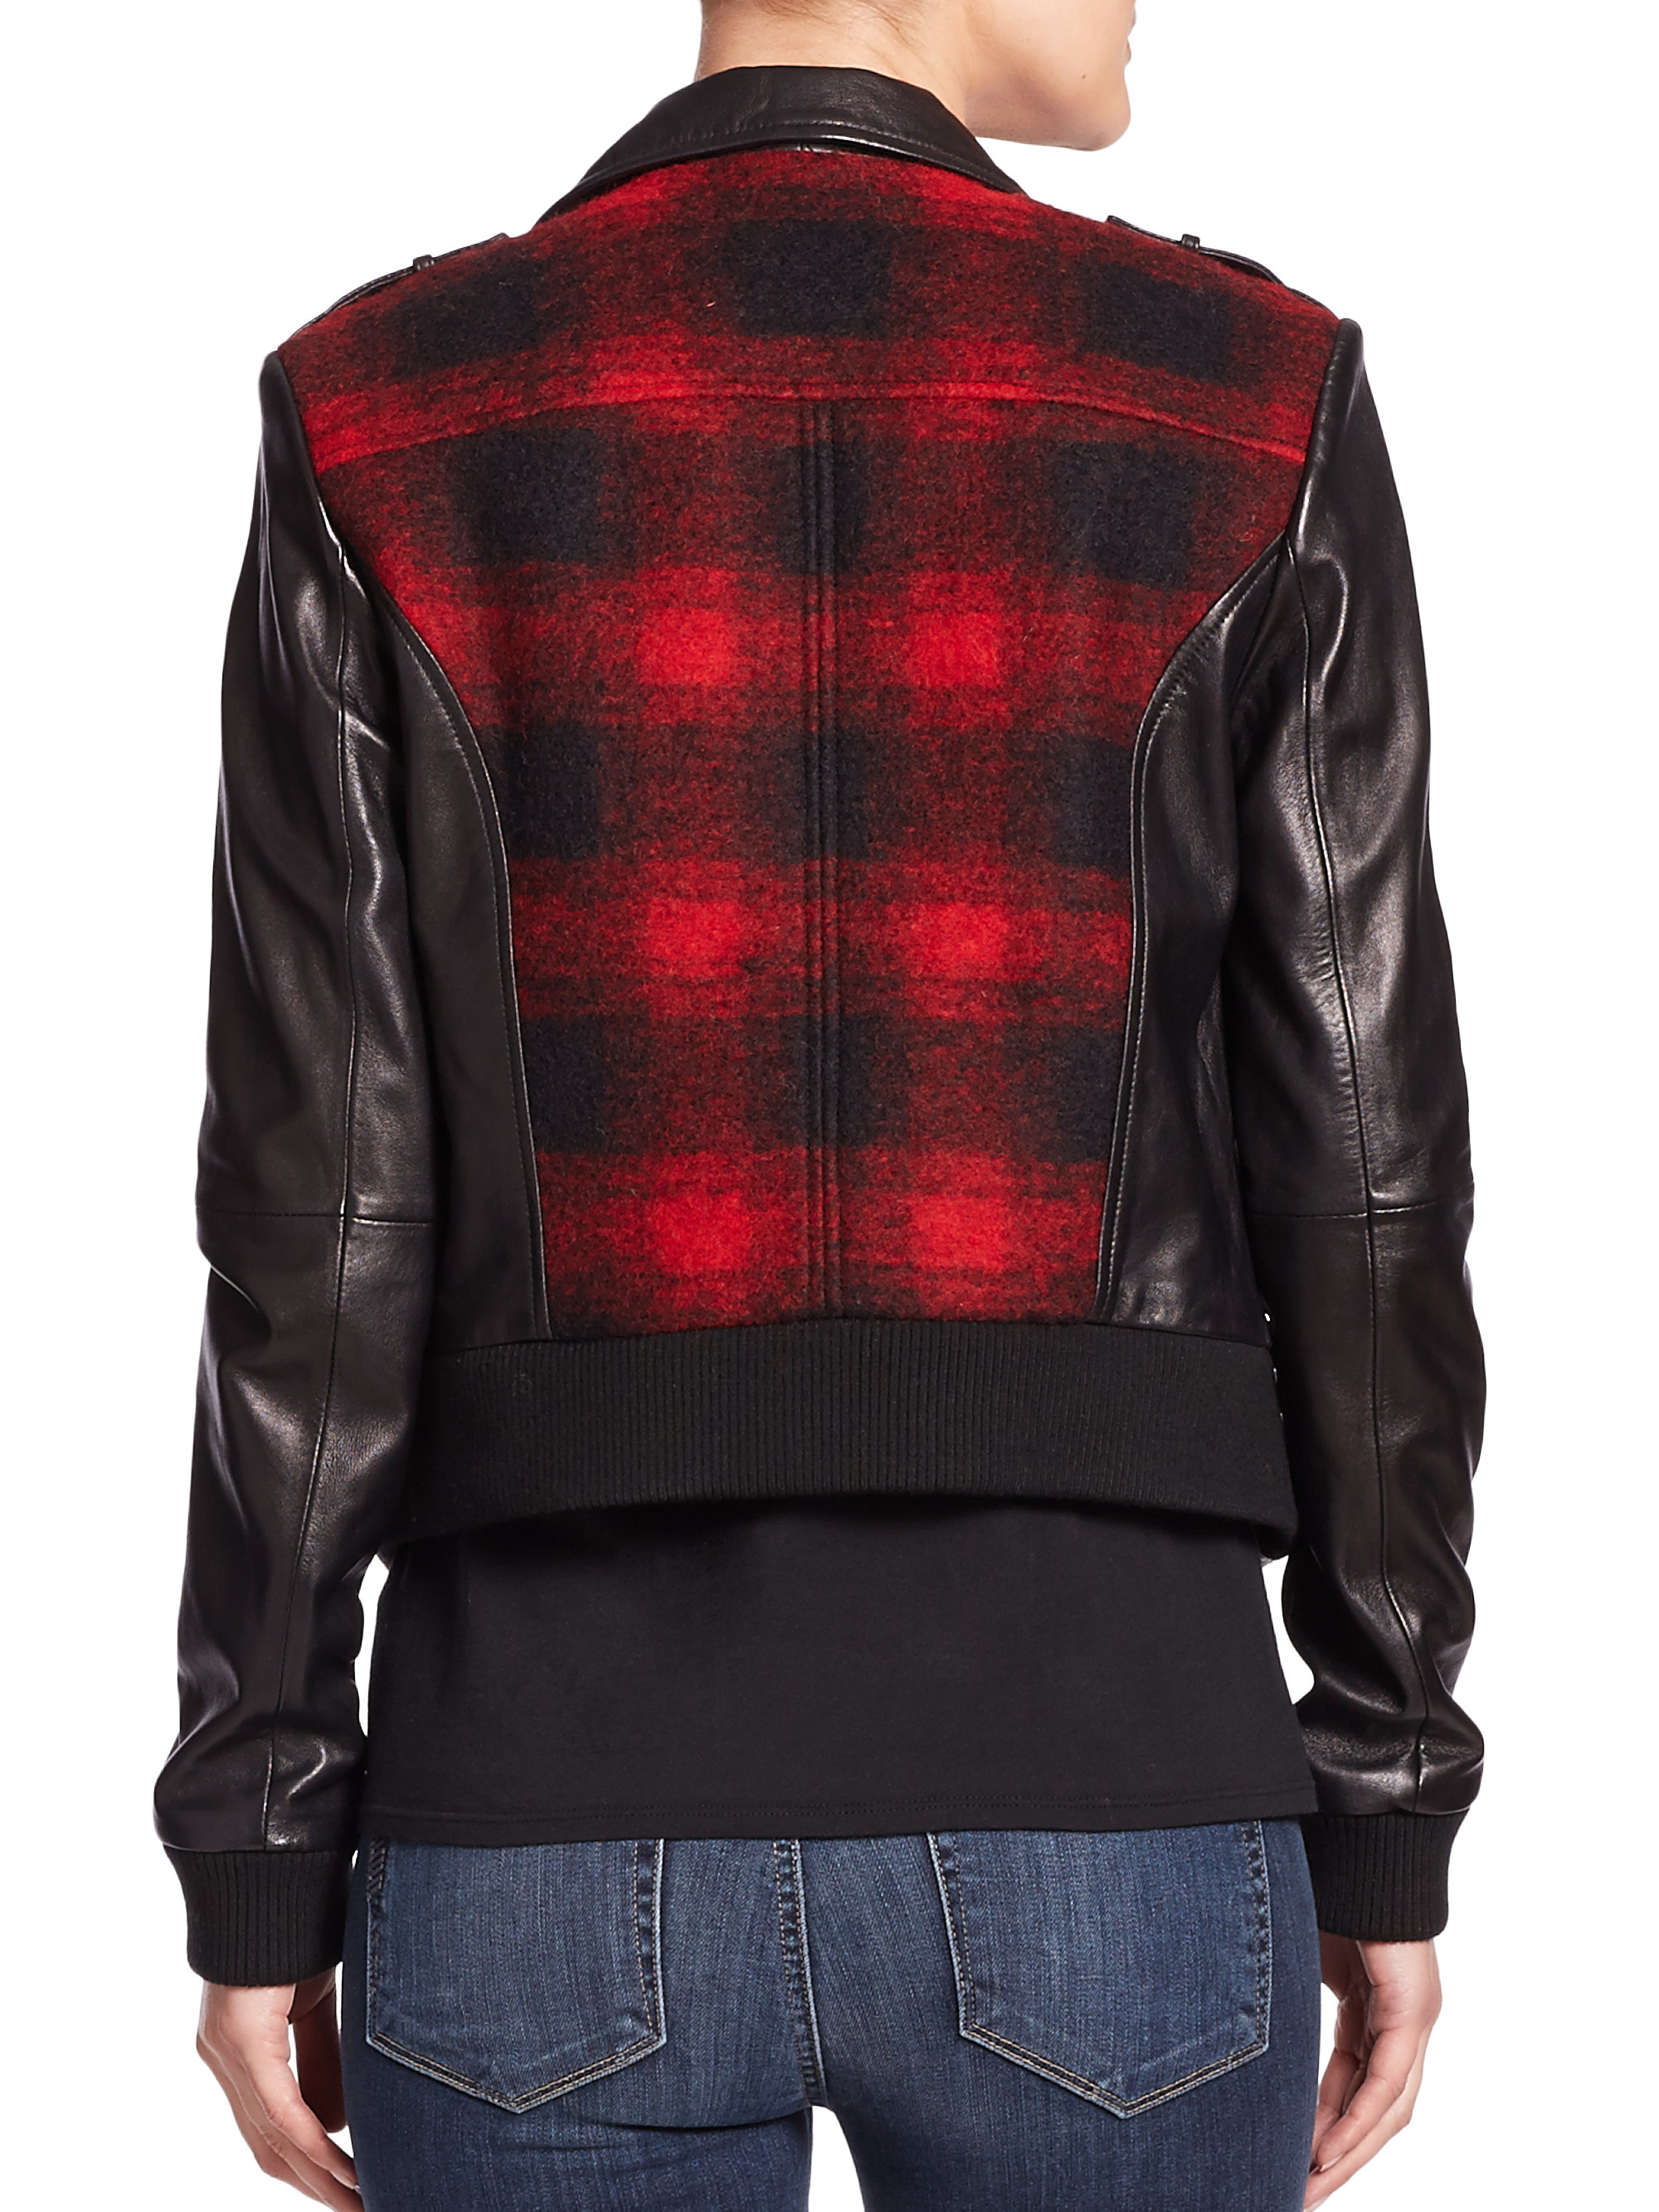 Lyst Paige Shelley Plaid Leather Moto Jacket in Black